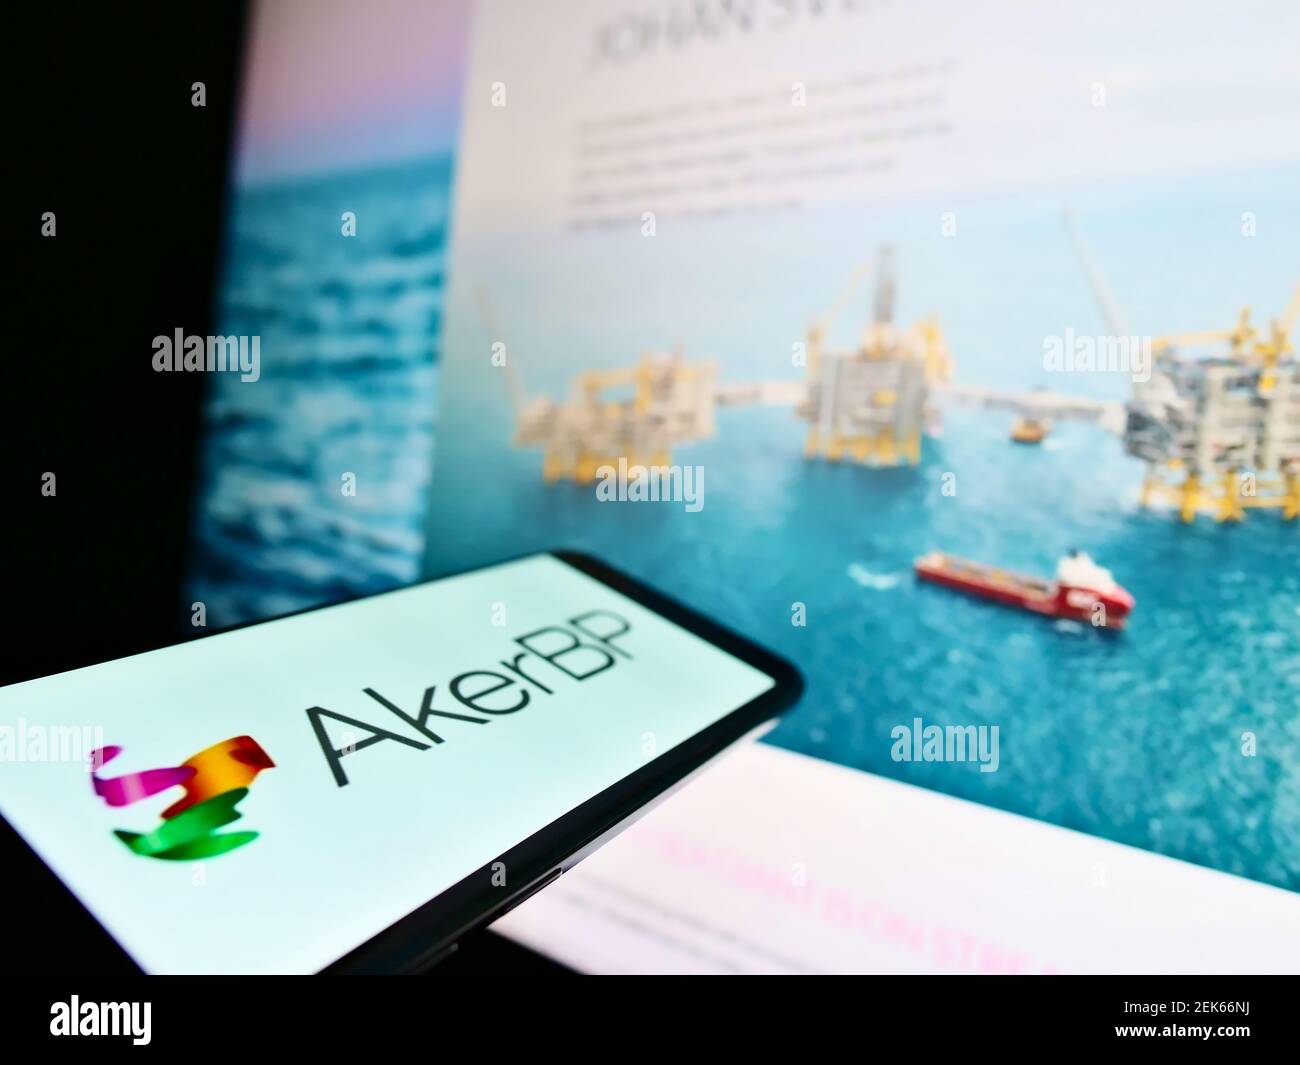 Cellphone with business logo of Norwegian oil and gas company Aker BP ASA on screen in front of website. Focus on center-left of phone display. Stock Photo